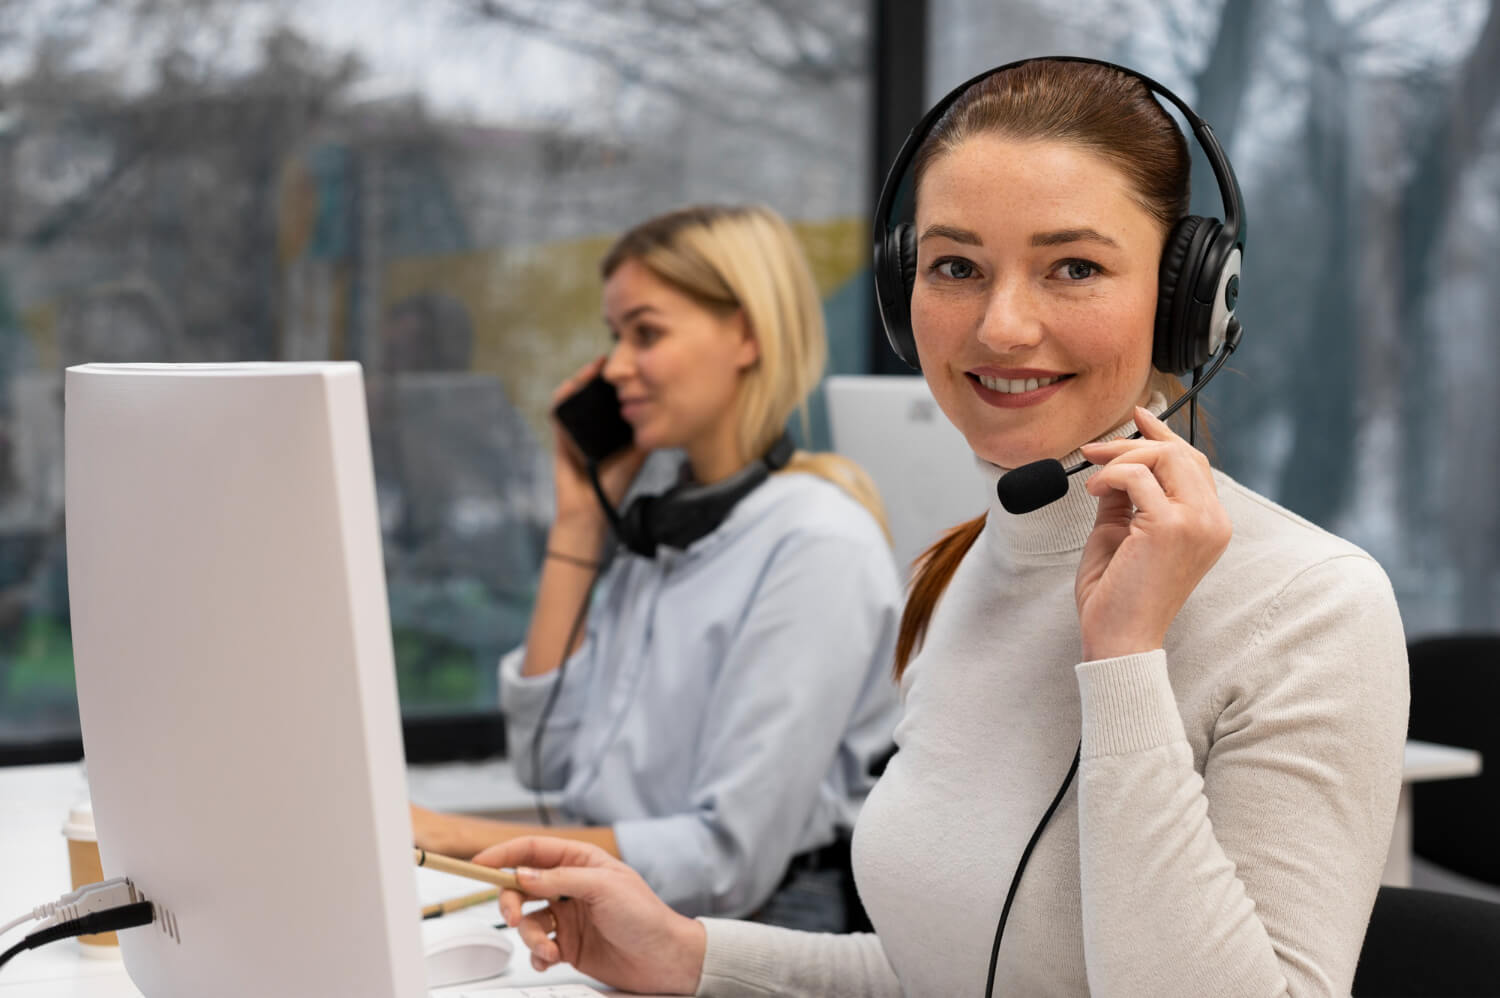 A young lady working in a call center smiling